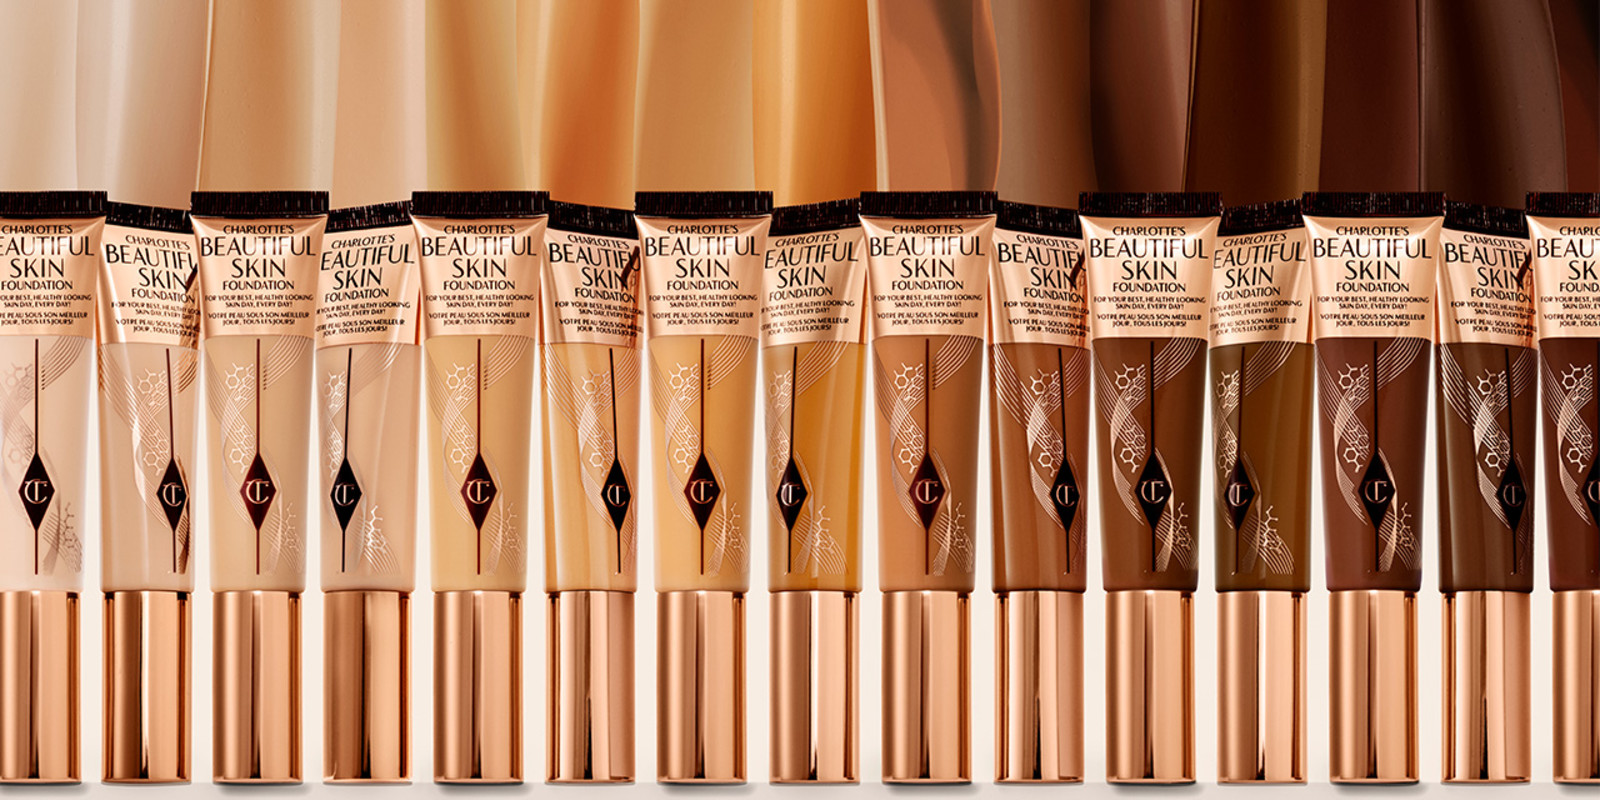 A collection of foundation wands in packaging that display the colour of the foundation inside for fair, light, medium, medium-light, medium-dark, and dark skin tones with sleek, gold-coloured lid.